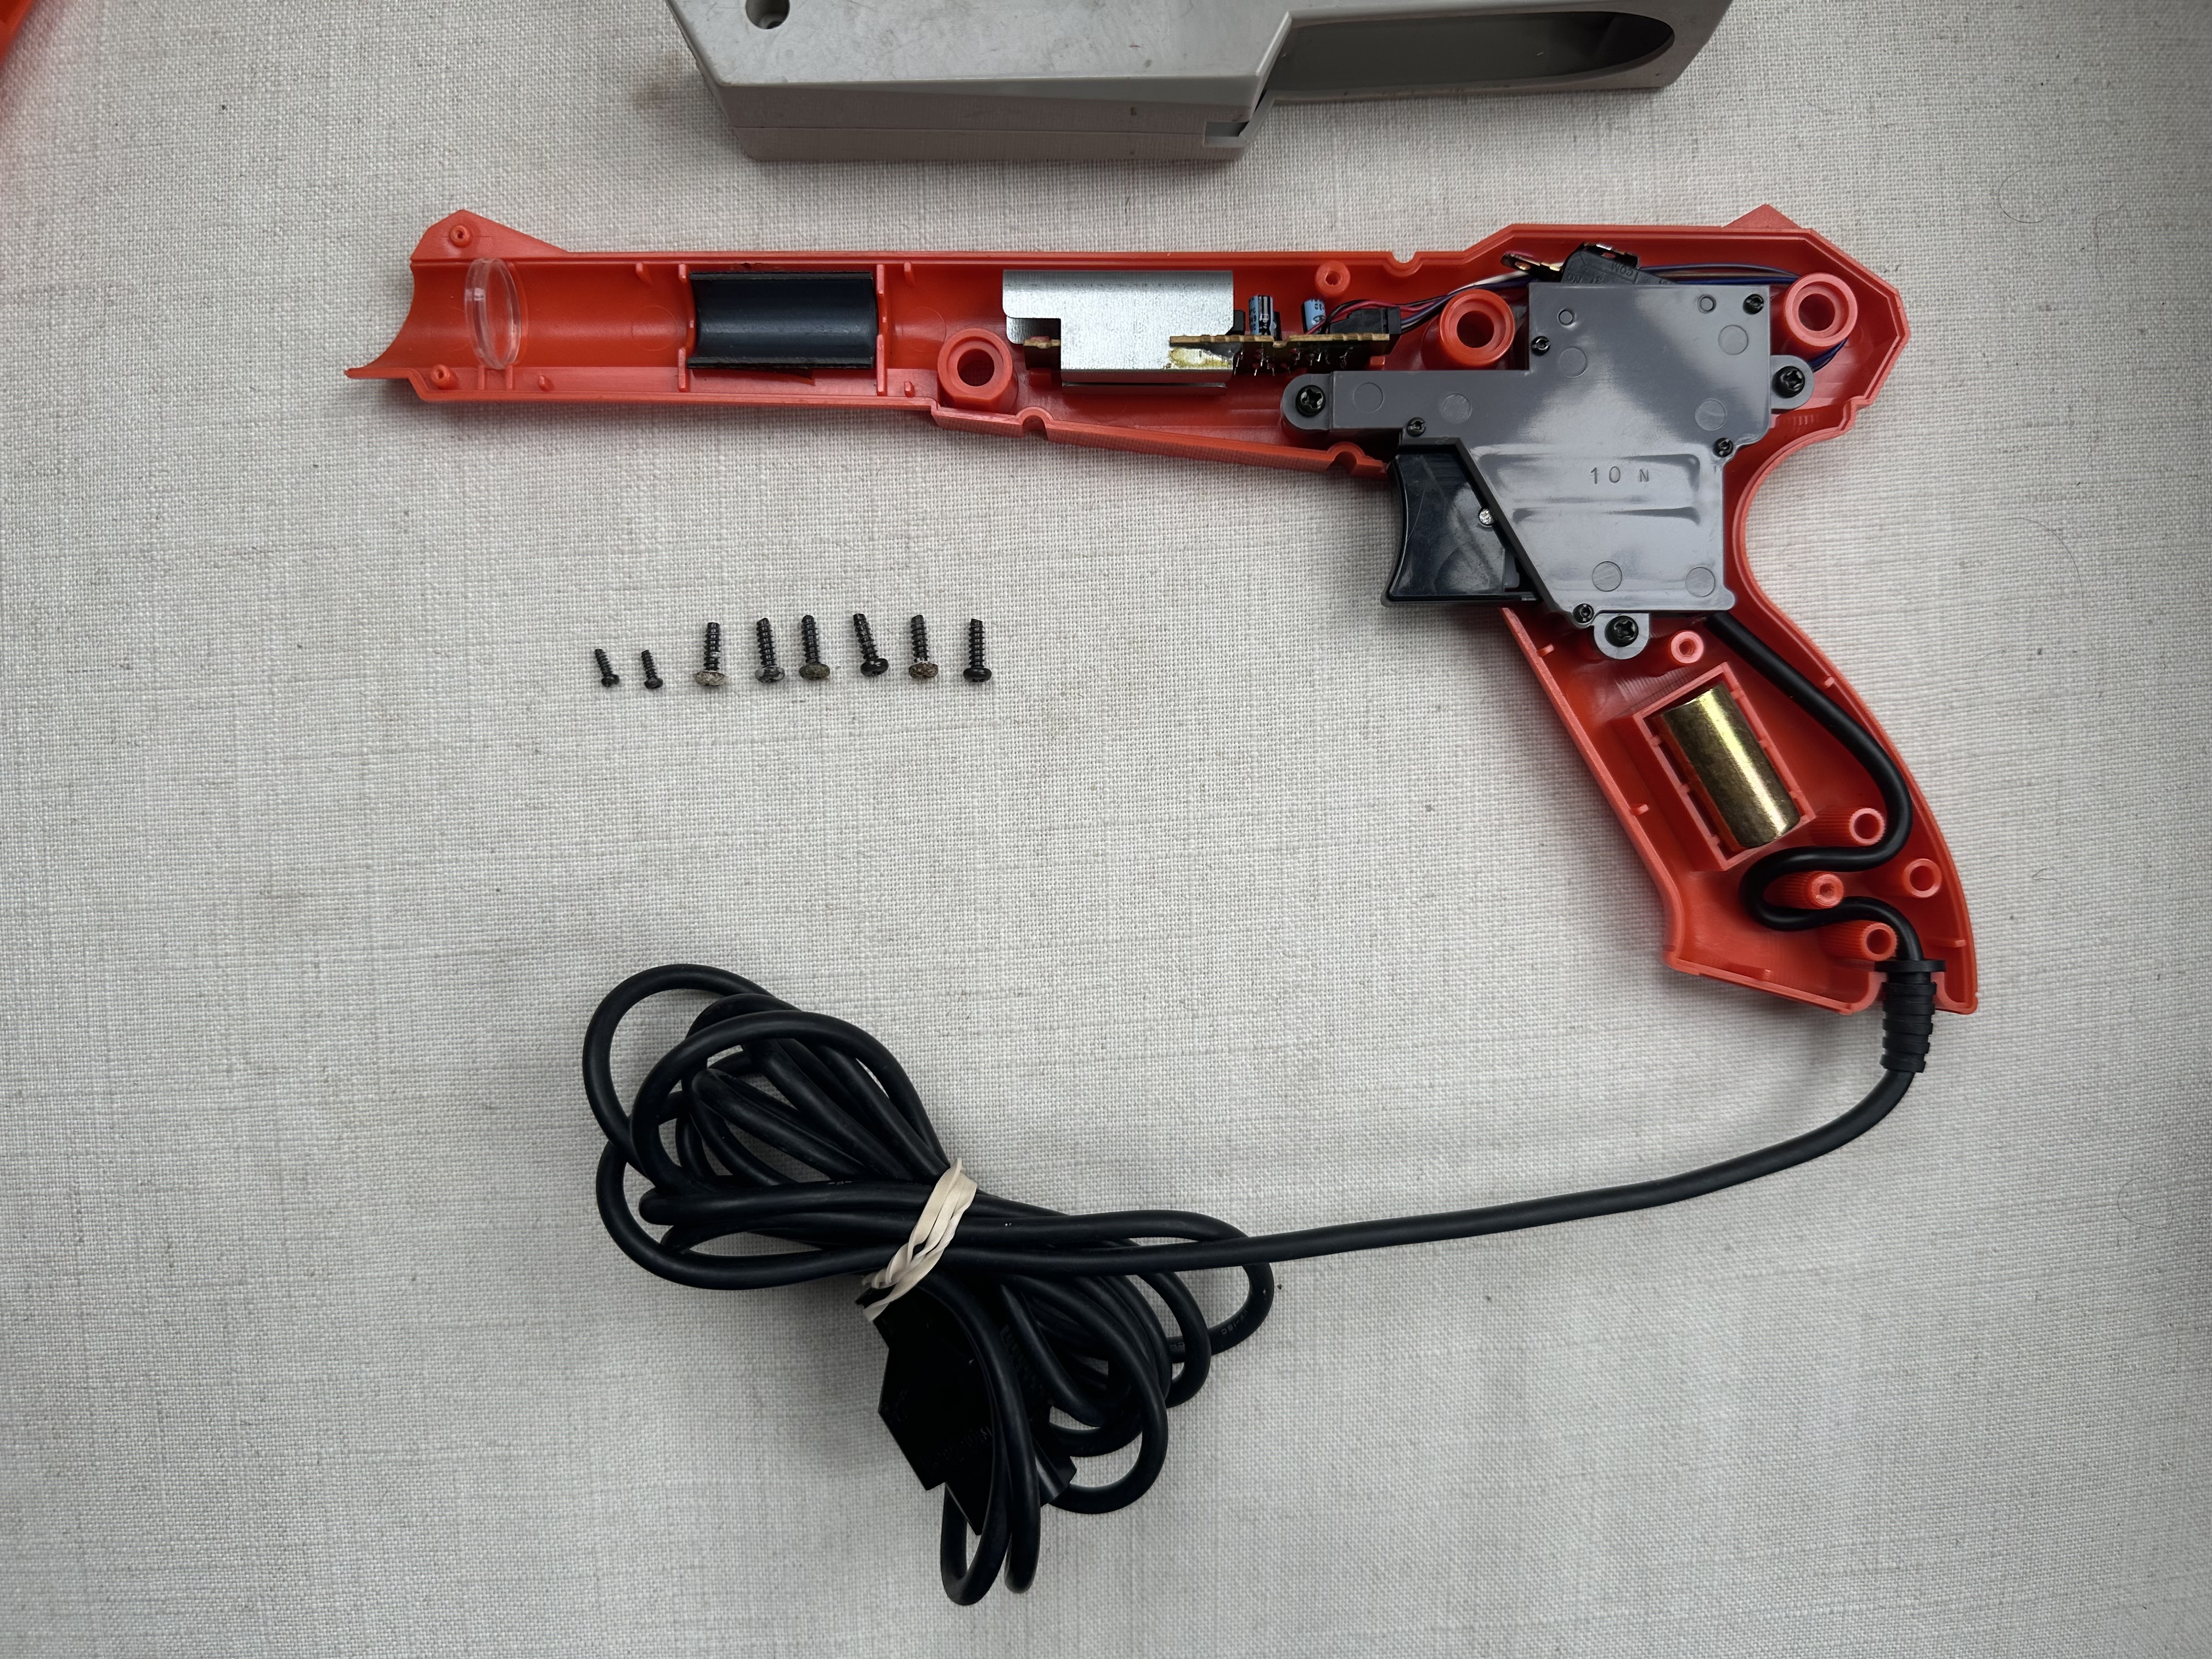 Lightgun with side cover off